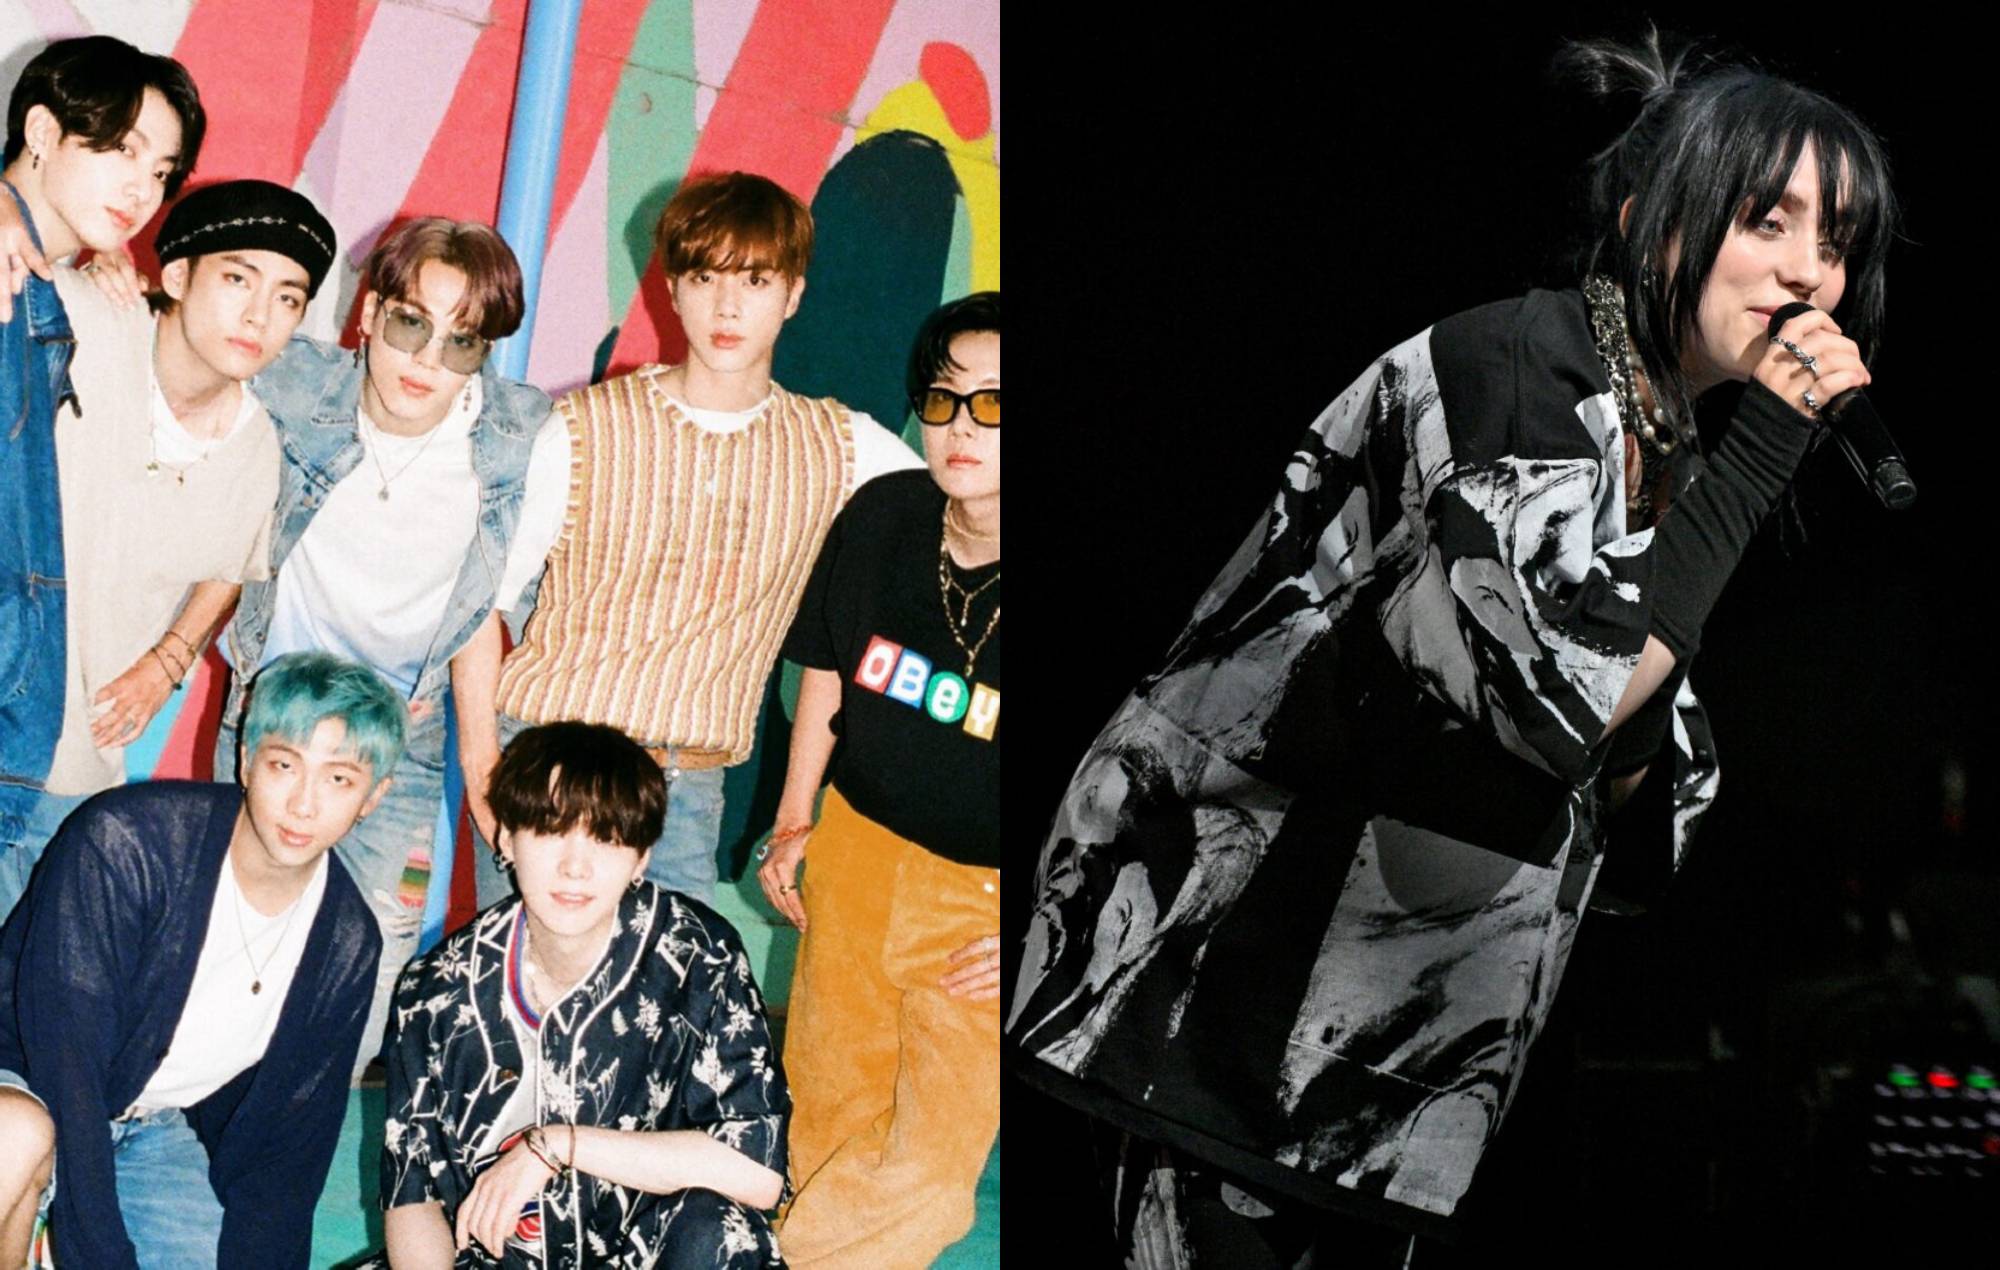 Billie and BTS among best music to fall asleep to - Rolling Stone UK